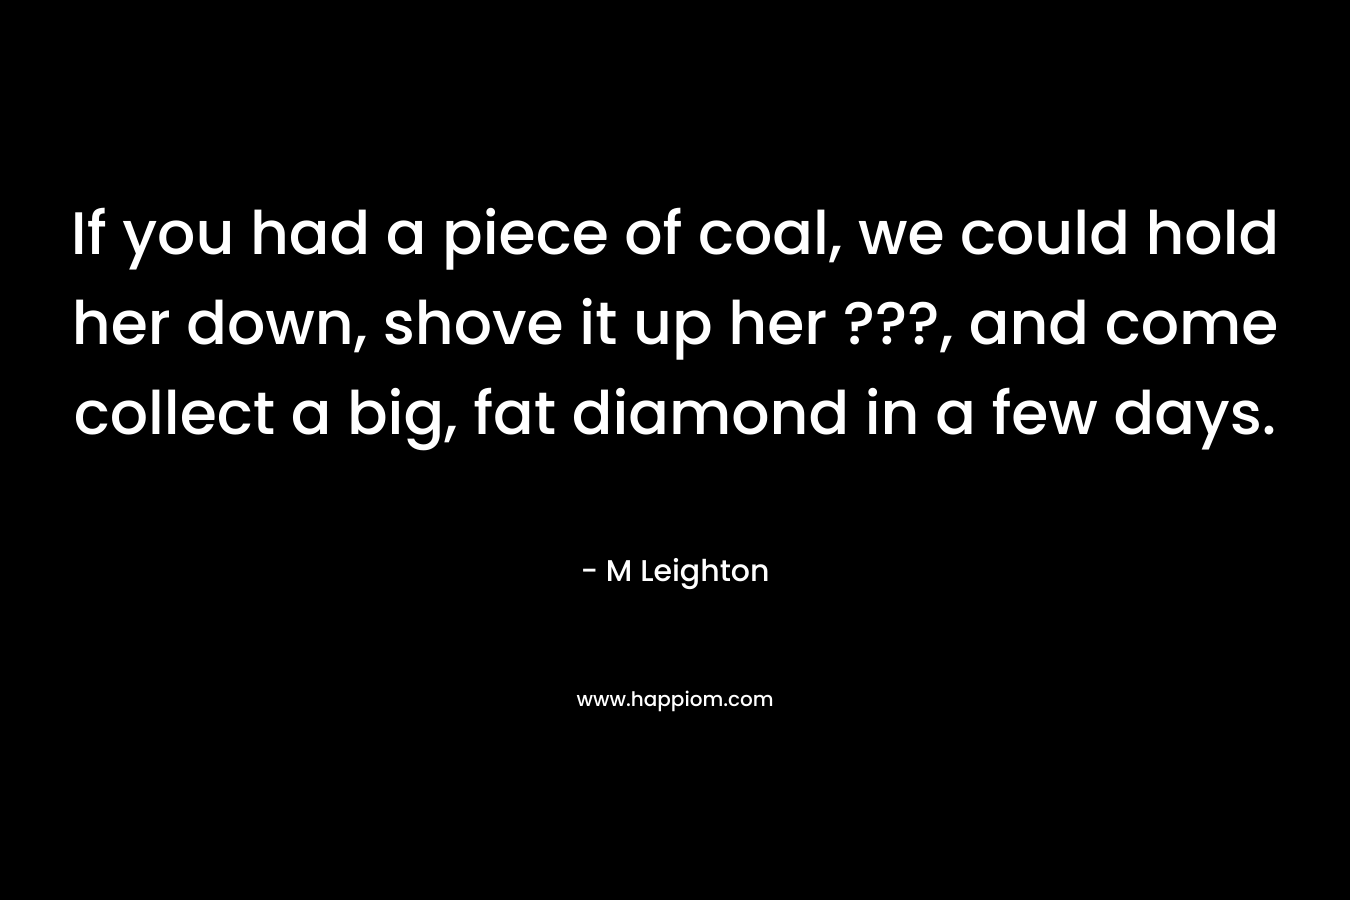 If you had a piece of coal, we could hold her down, shove it up her ???, and come collect a big, fat diamond in a few days.